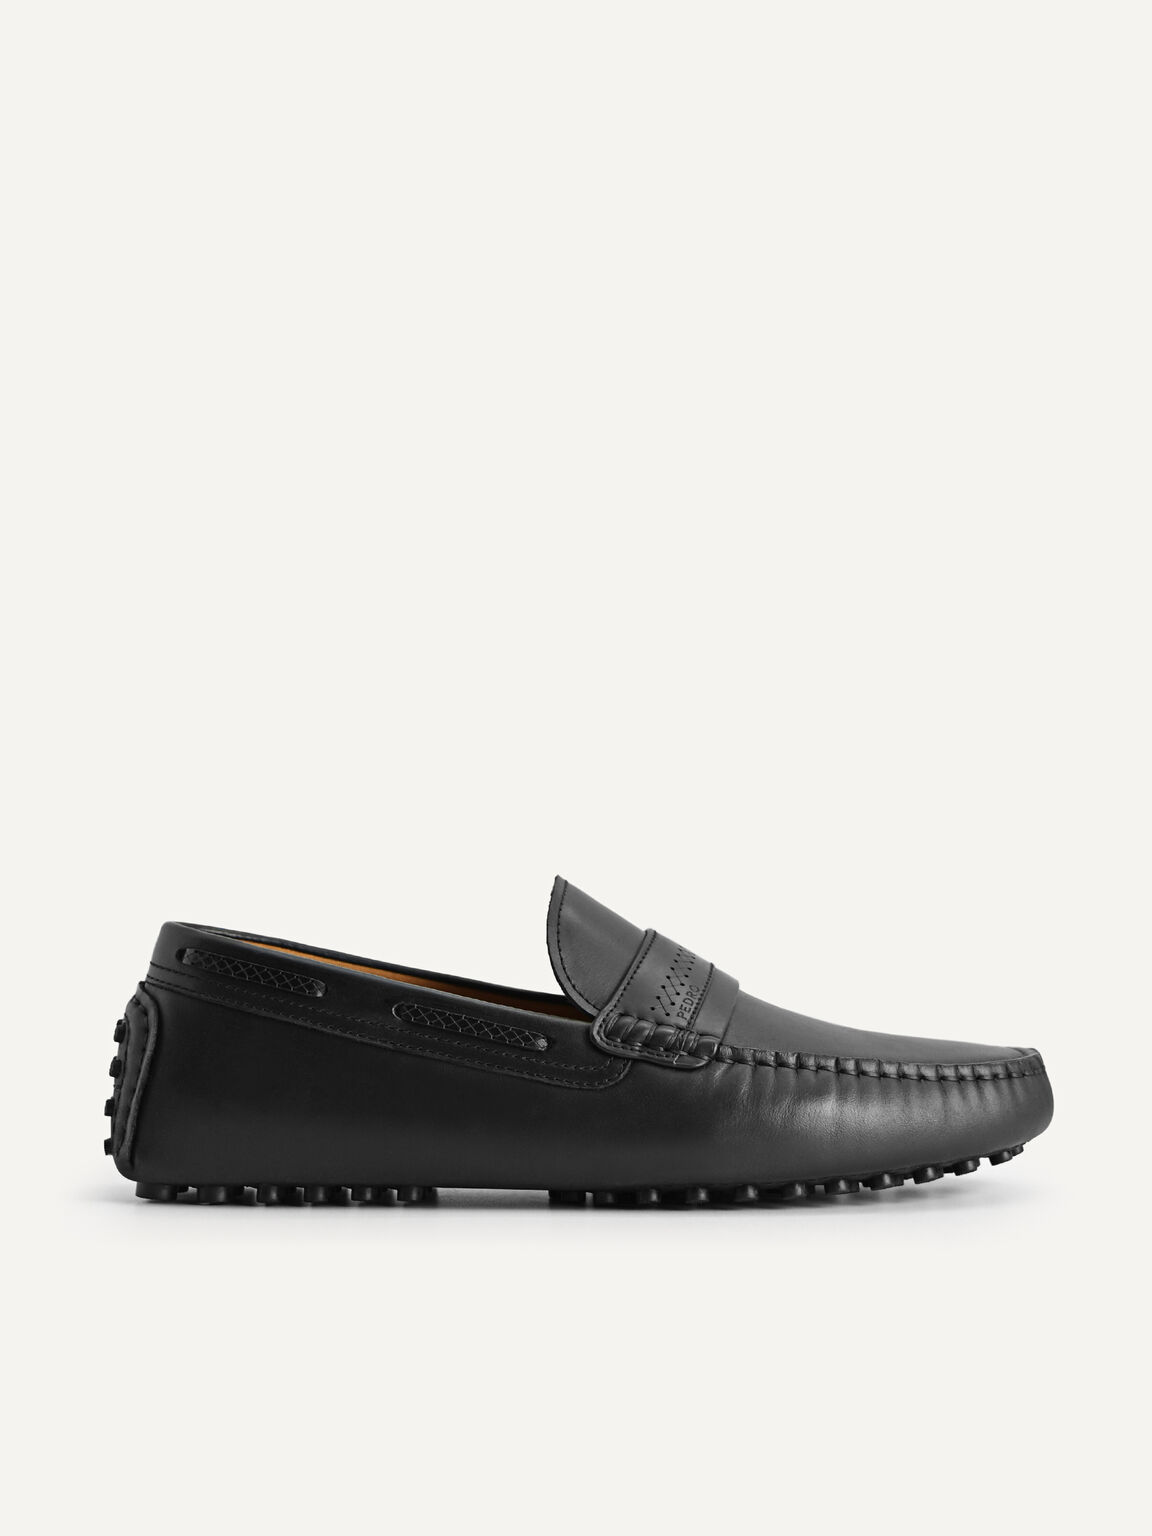 Leather Moccasins with Stitch Detailing, Black, hi-res